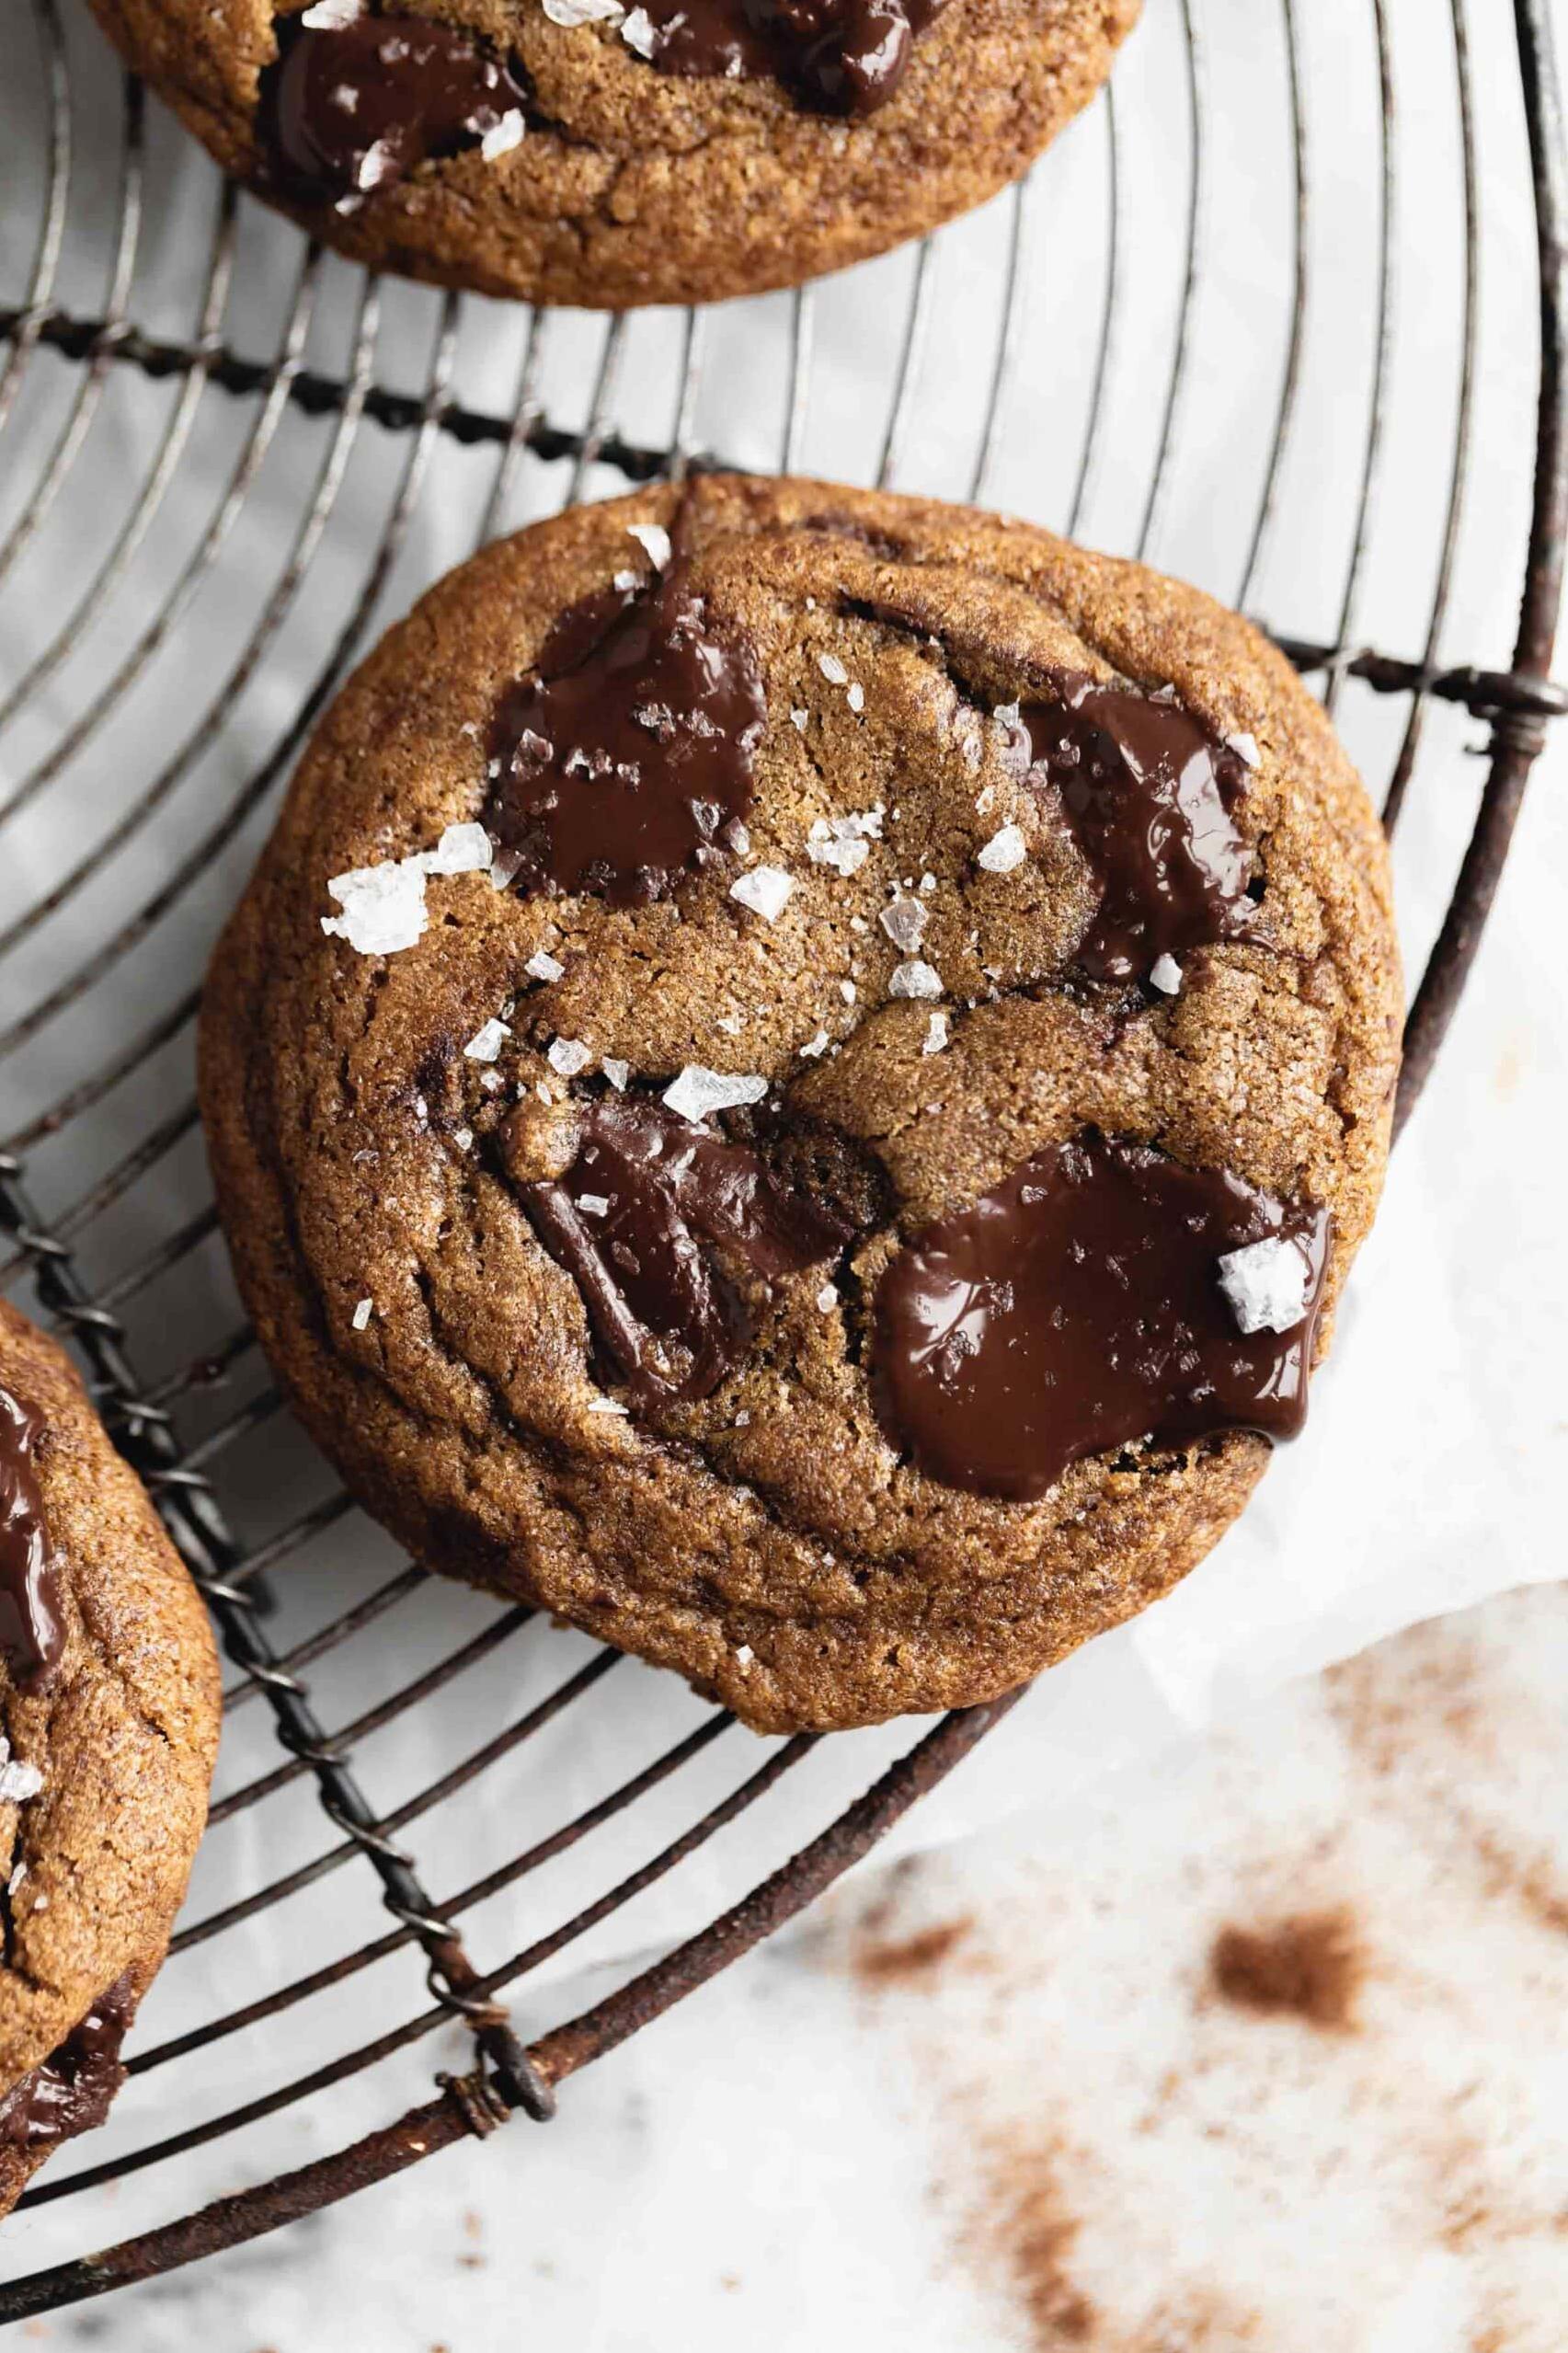 Indulge Your Sweet Tooth: Espresso Chocolate Chip Cookies